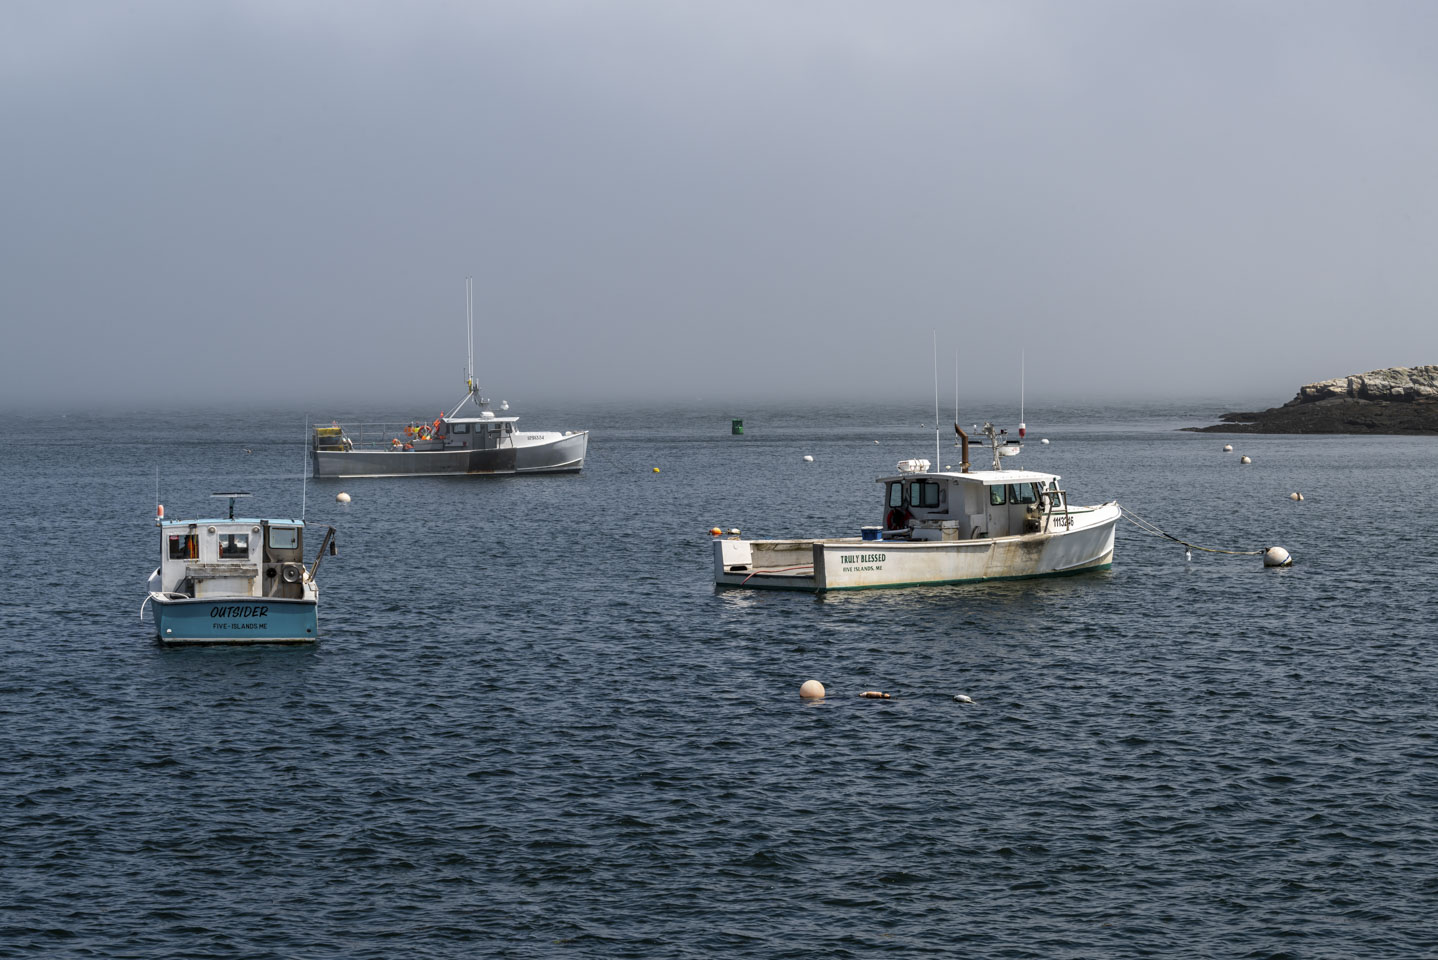 Five Islands harbor with 3 boats in front of a wall of fog